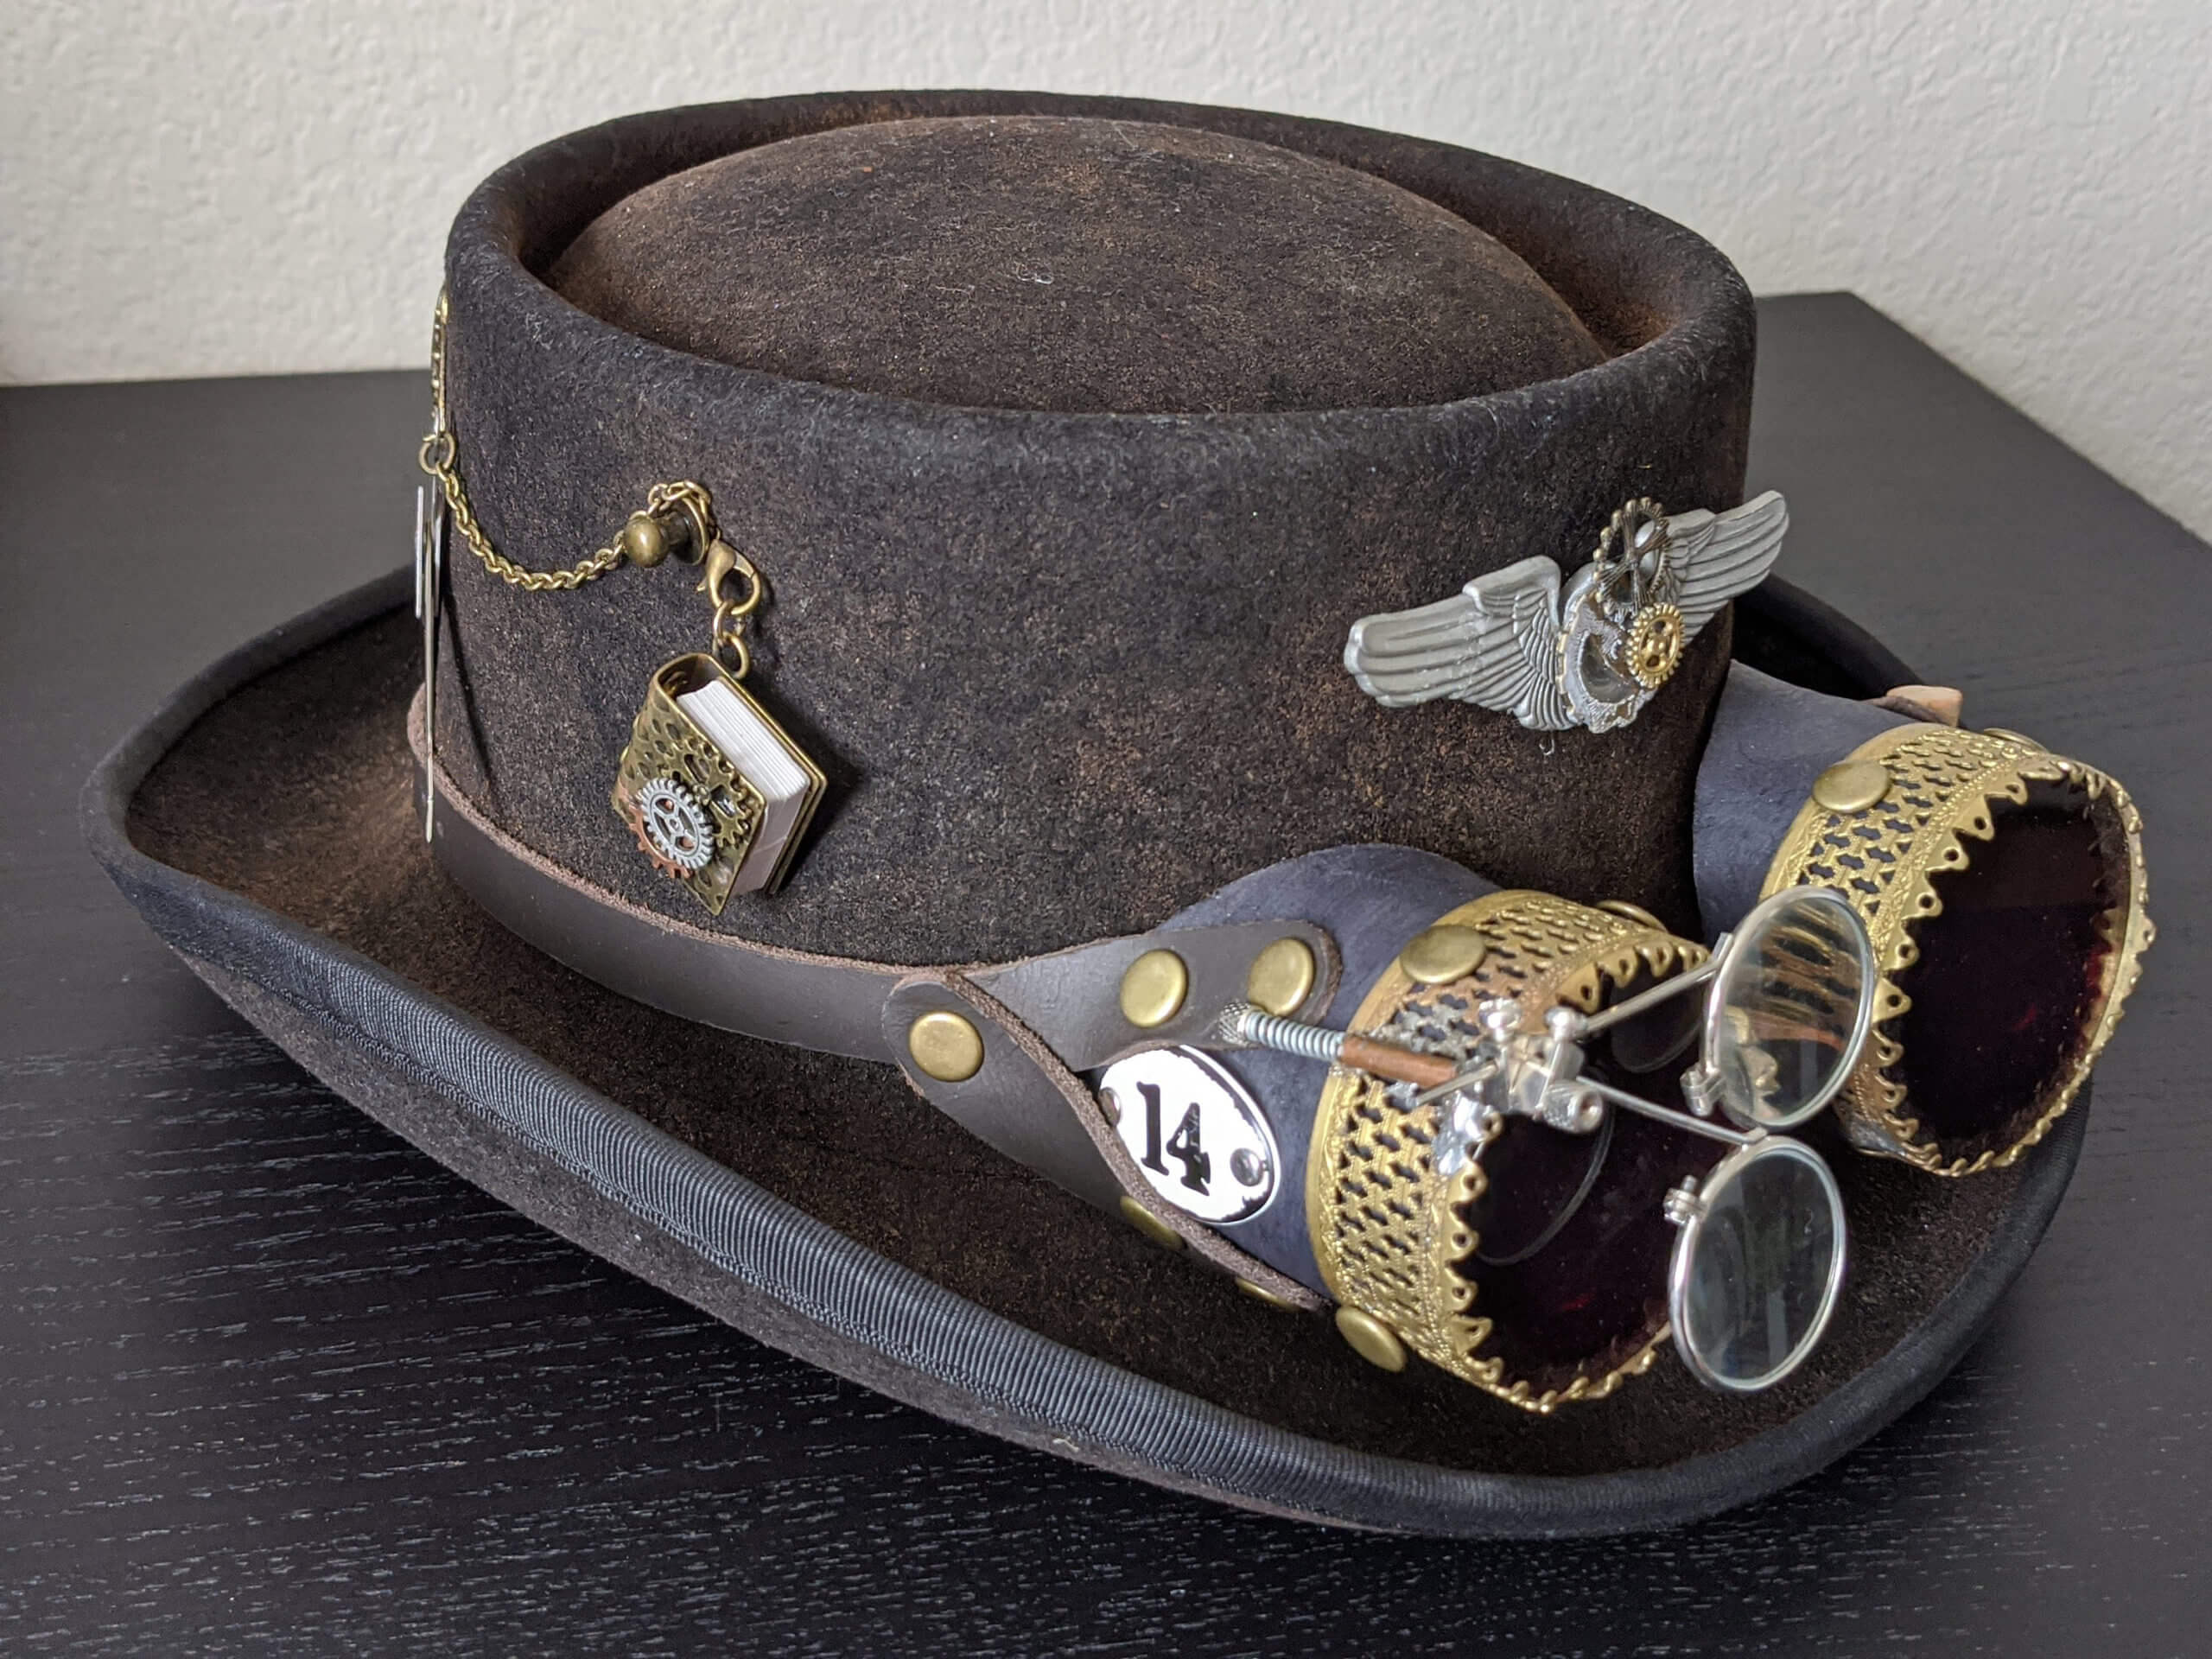 Steampunk Hat: Steampunk Accessories – Steampunk Goggle Gears Bulb Leather  Wool – Handcrafted- Top hat Goggles – J&J Leather, Steampunk and Watches